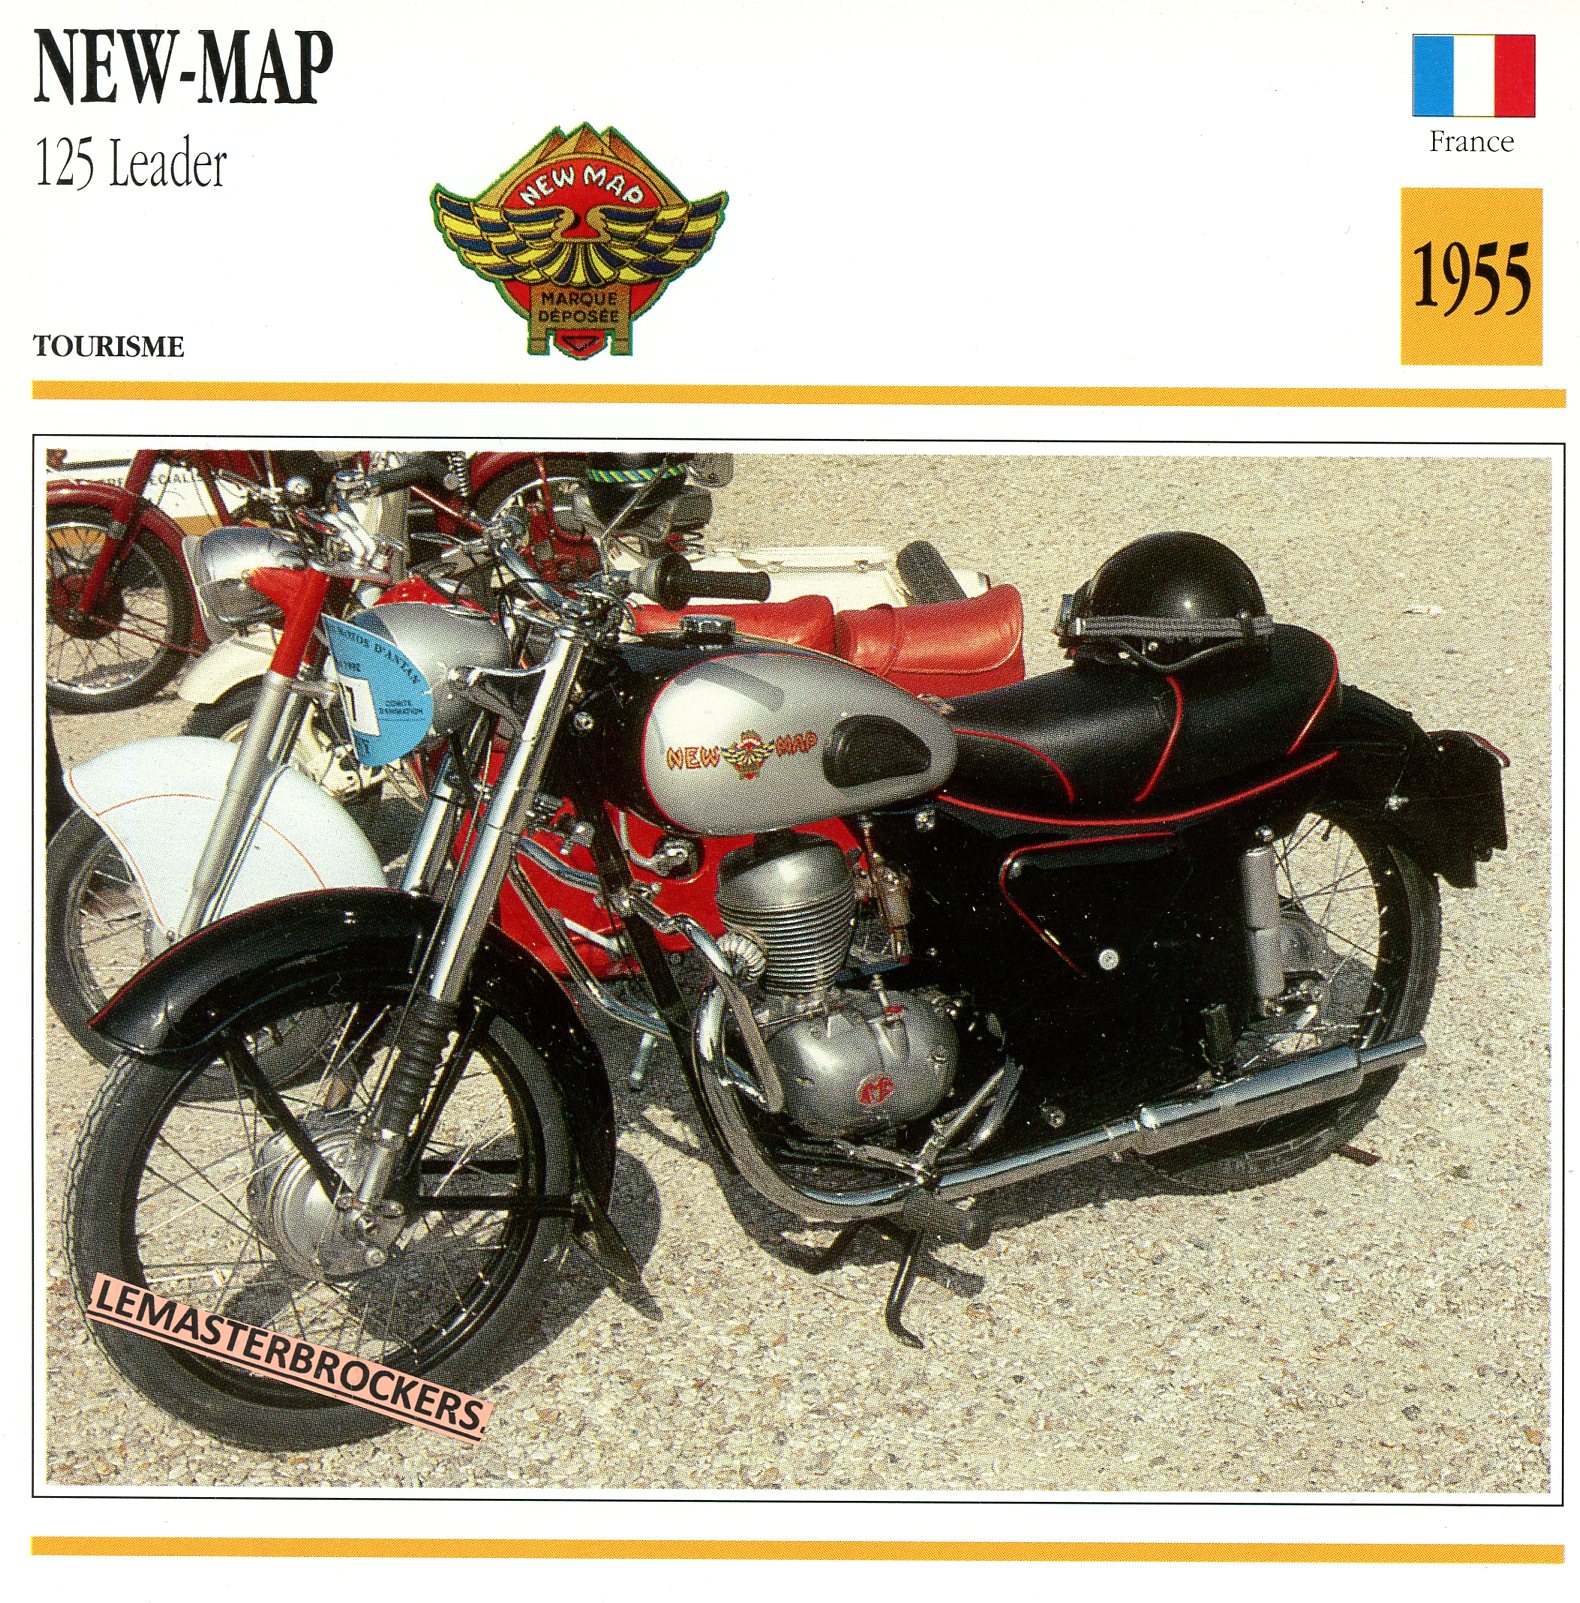 NEW-MPA-LEADER-125-NEWMAP-FICHE-MOTO-ATLAS-lemasterbrockers-CARD-MOTORCYCLE